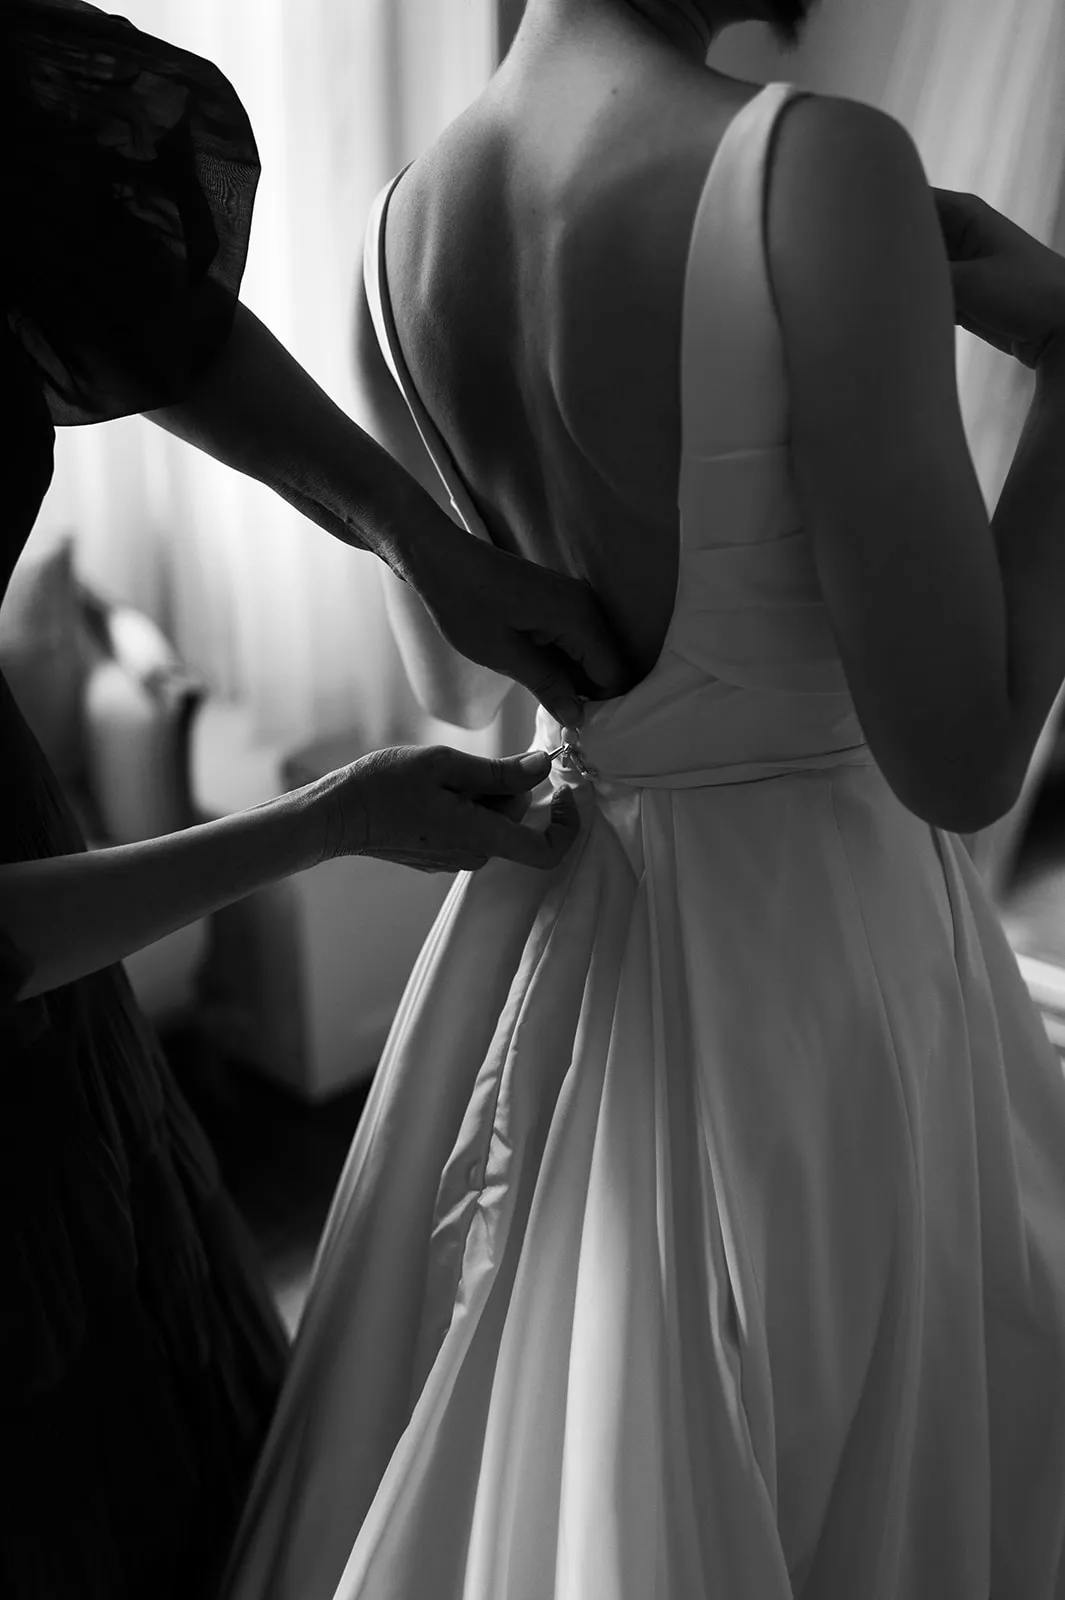 A black and white photo of a bride being helped by someone to fasten the back of her dress. The bride is wearing a sleeveless gown with an open back, and delicate hands are adjusting the fabric and buttons on her waist. The scene is set in a softly lit room.